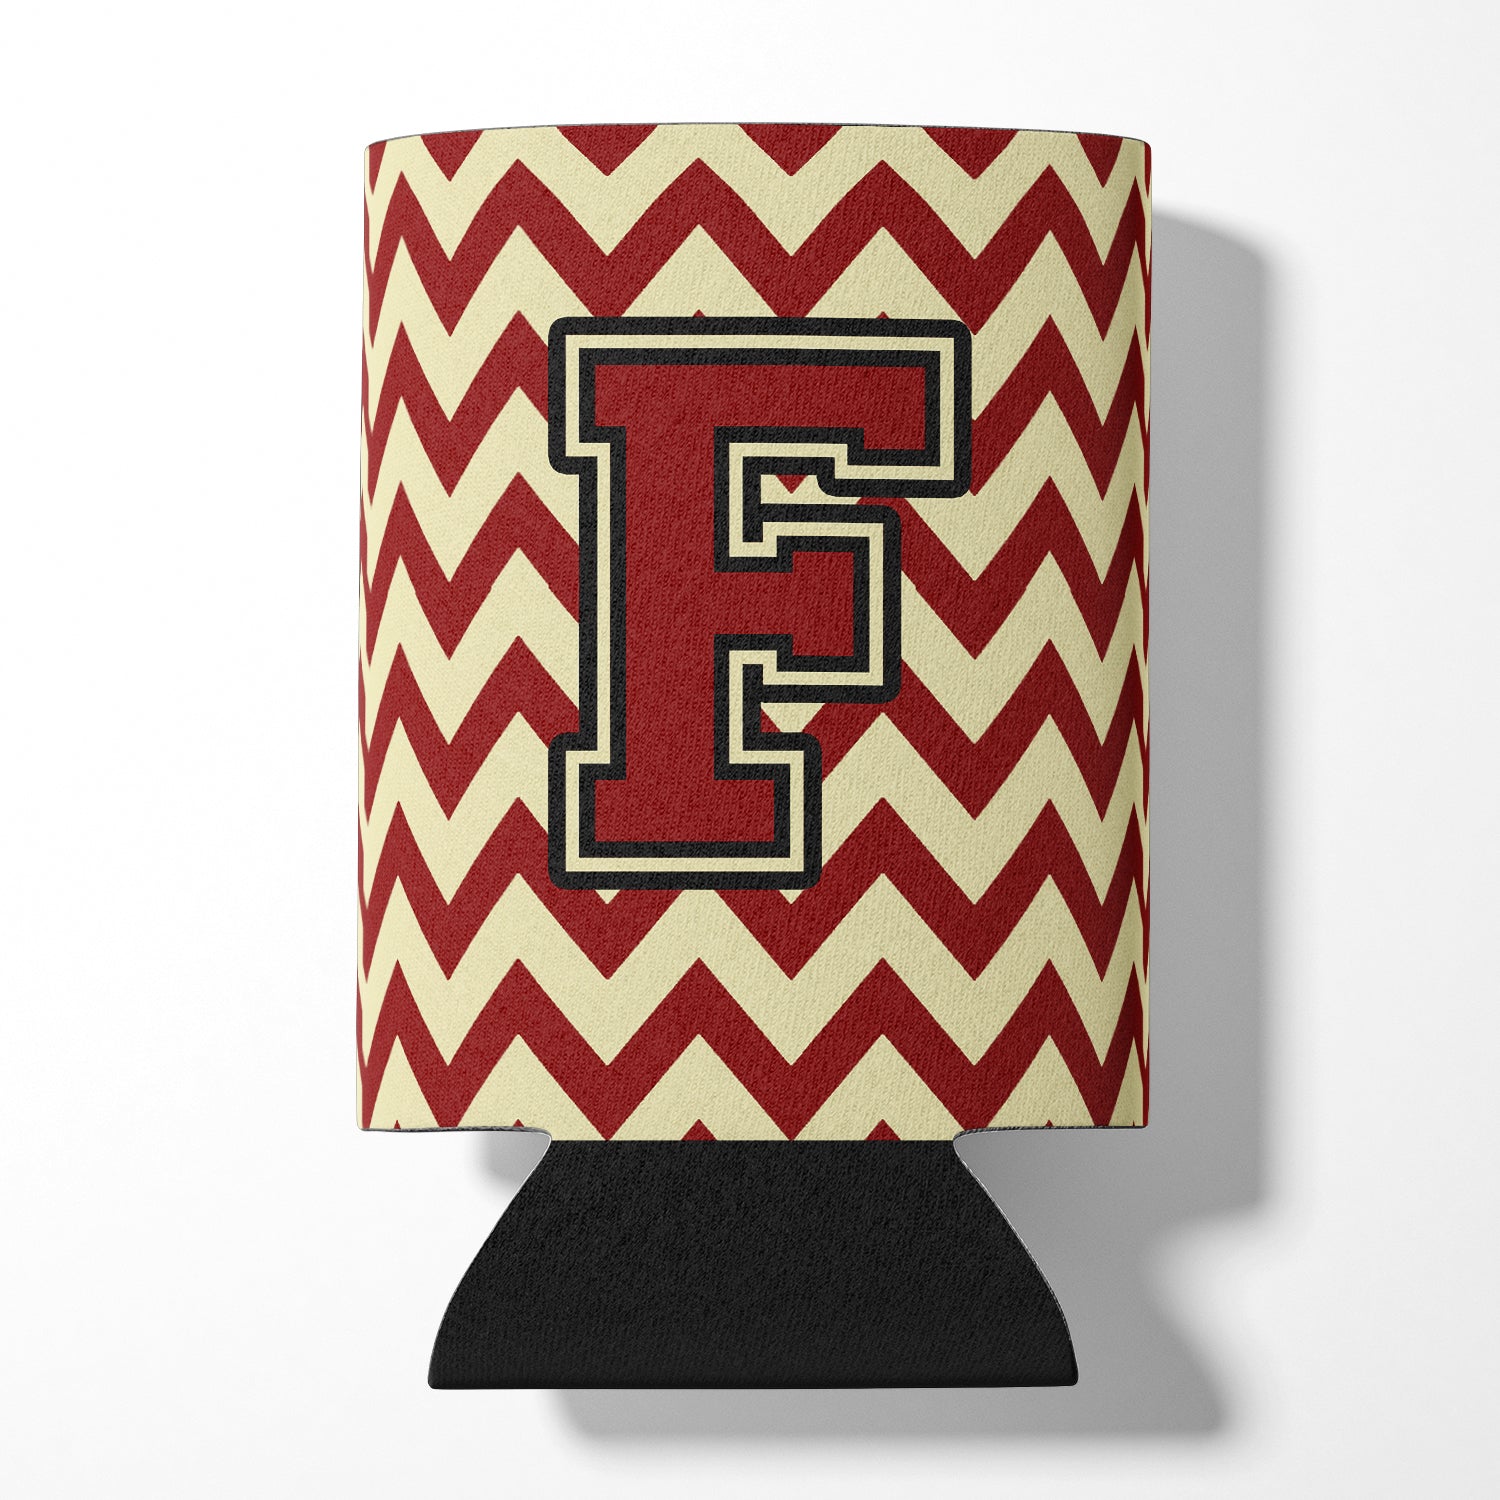 Letter F Chevron Maroon and Gold Can or Bottle Hugger CJ1061-FCC